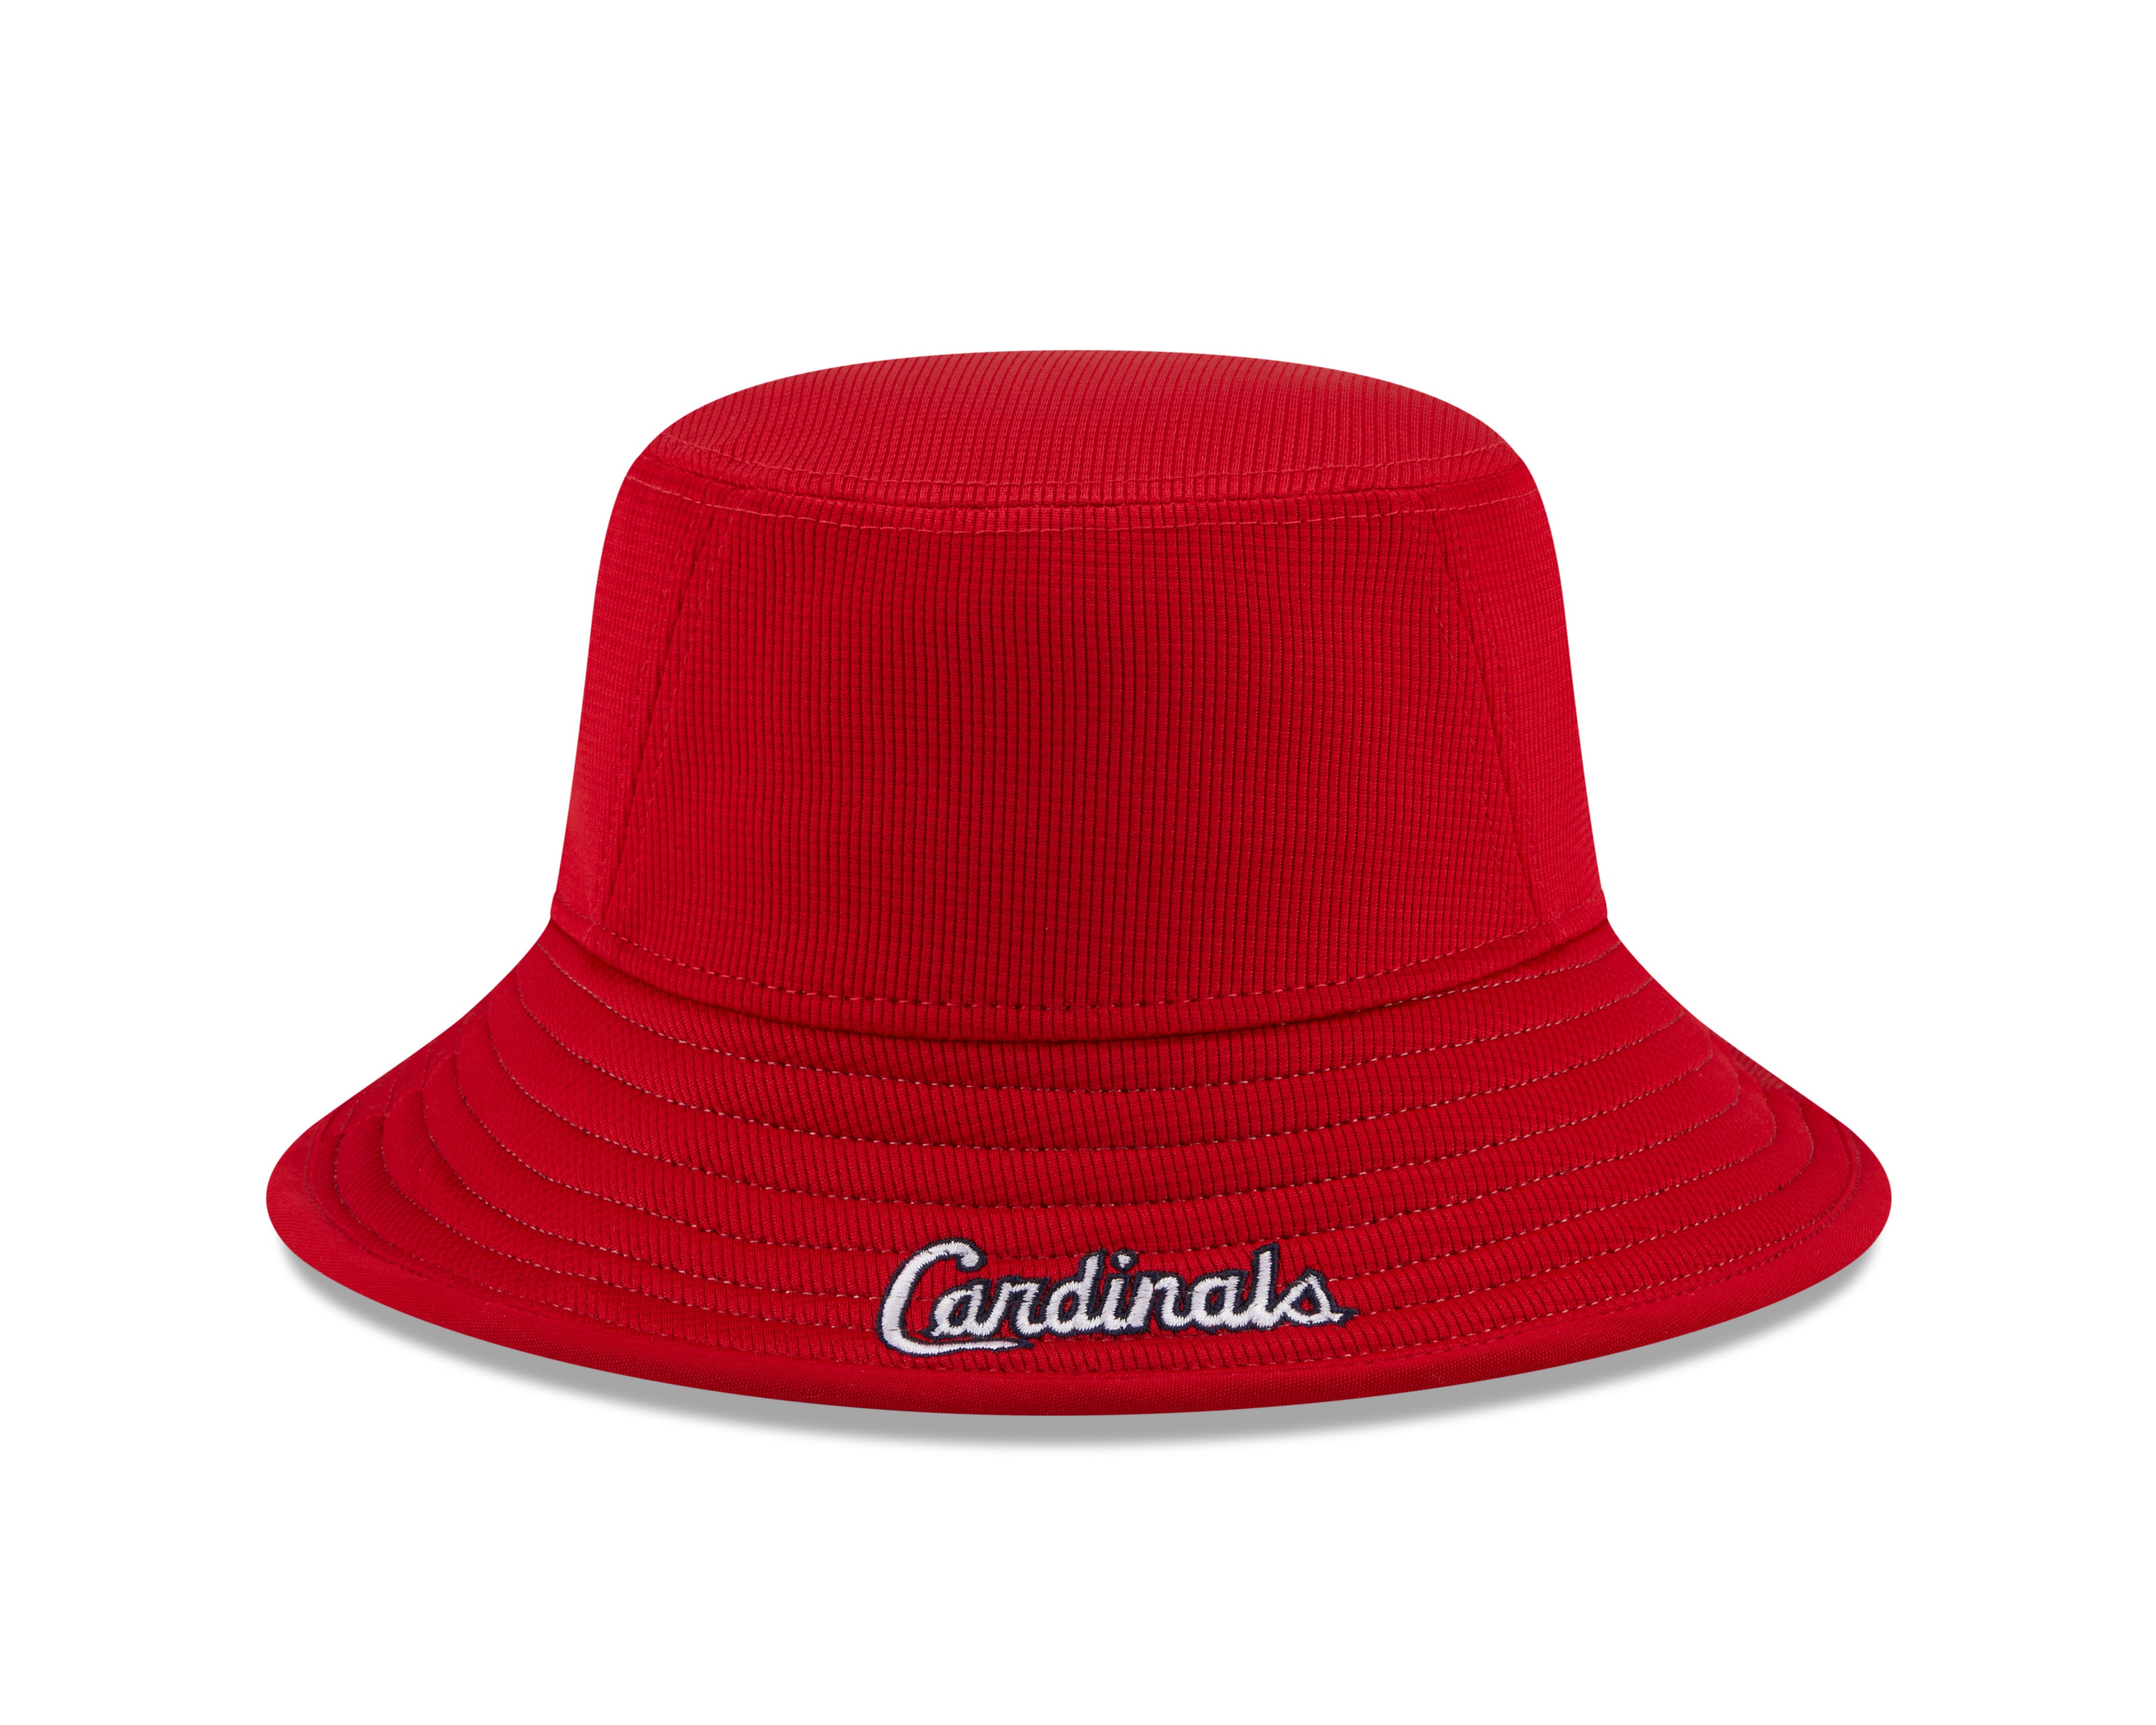 St. Louis Cardinals 2021 Red BUCKET Hat by New Era